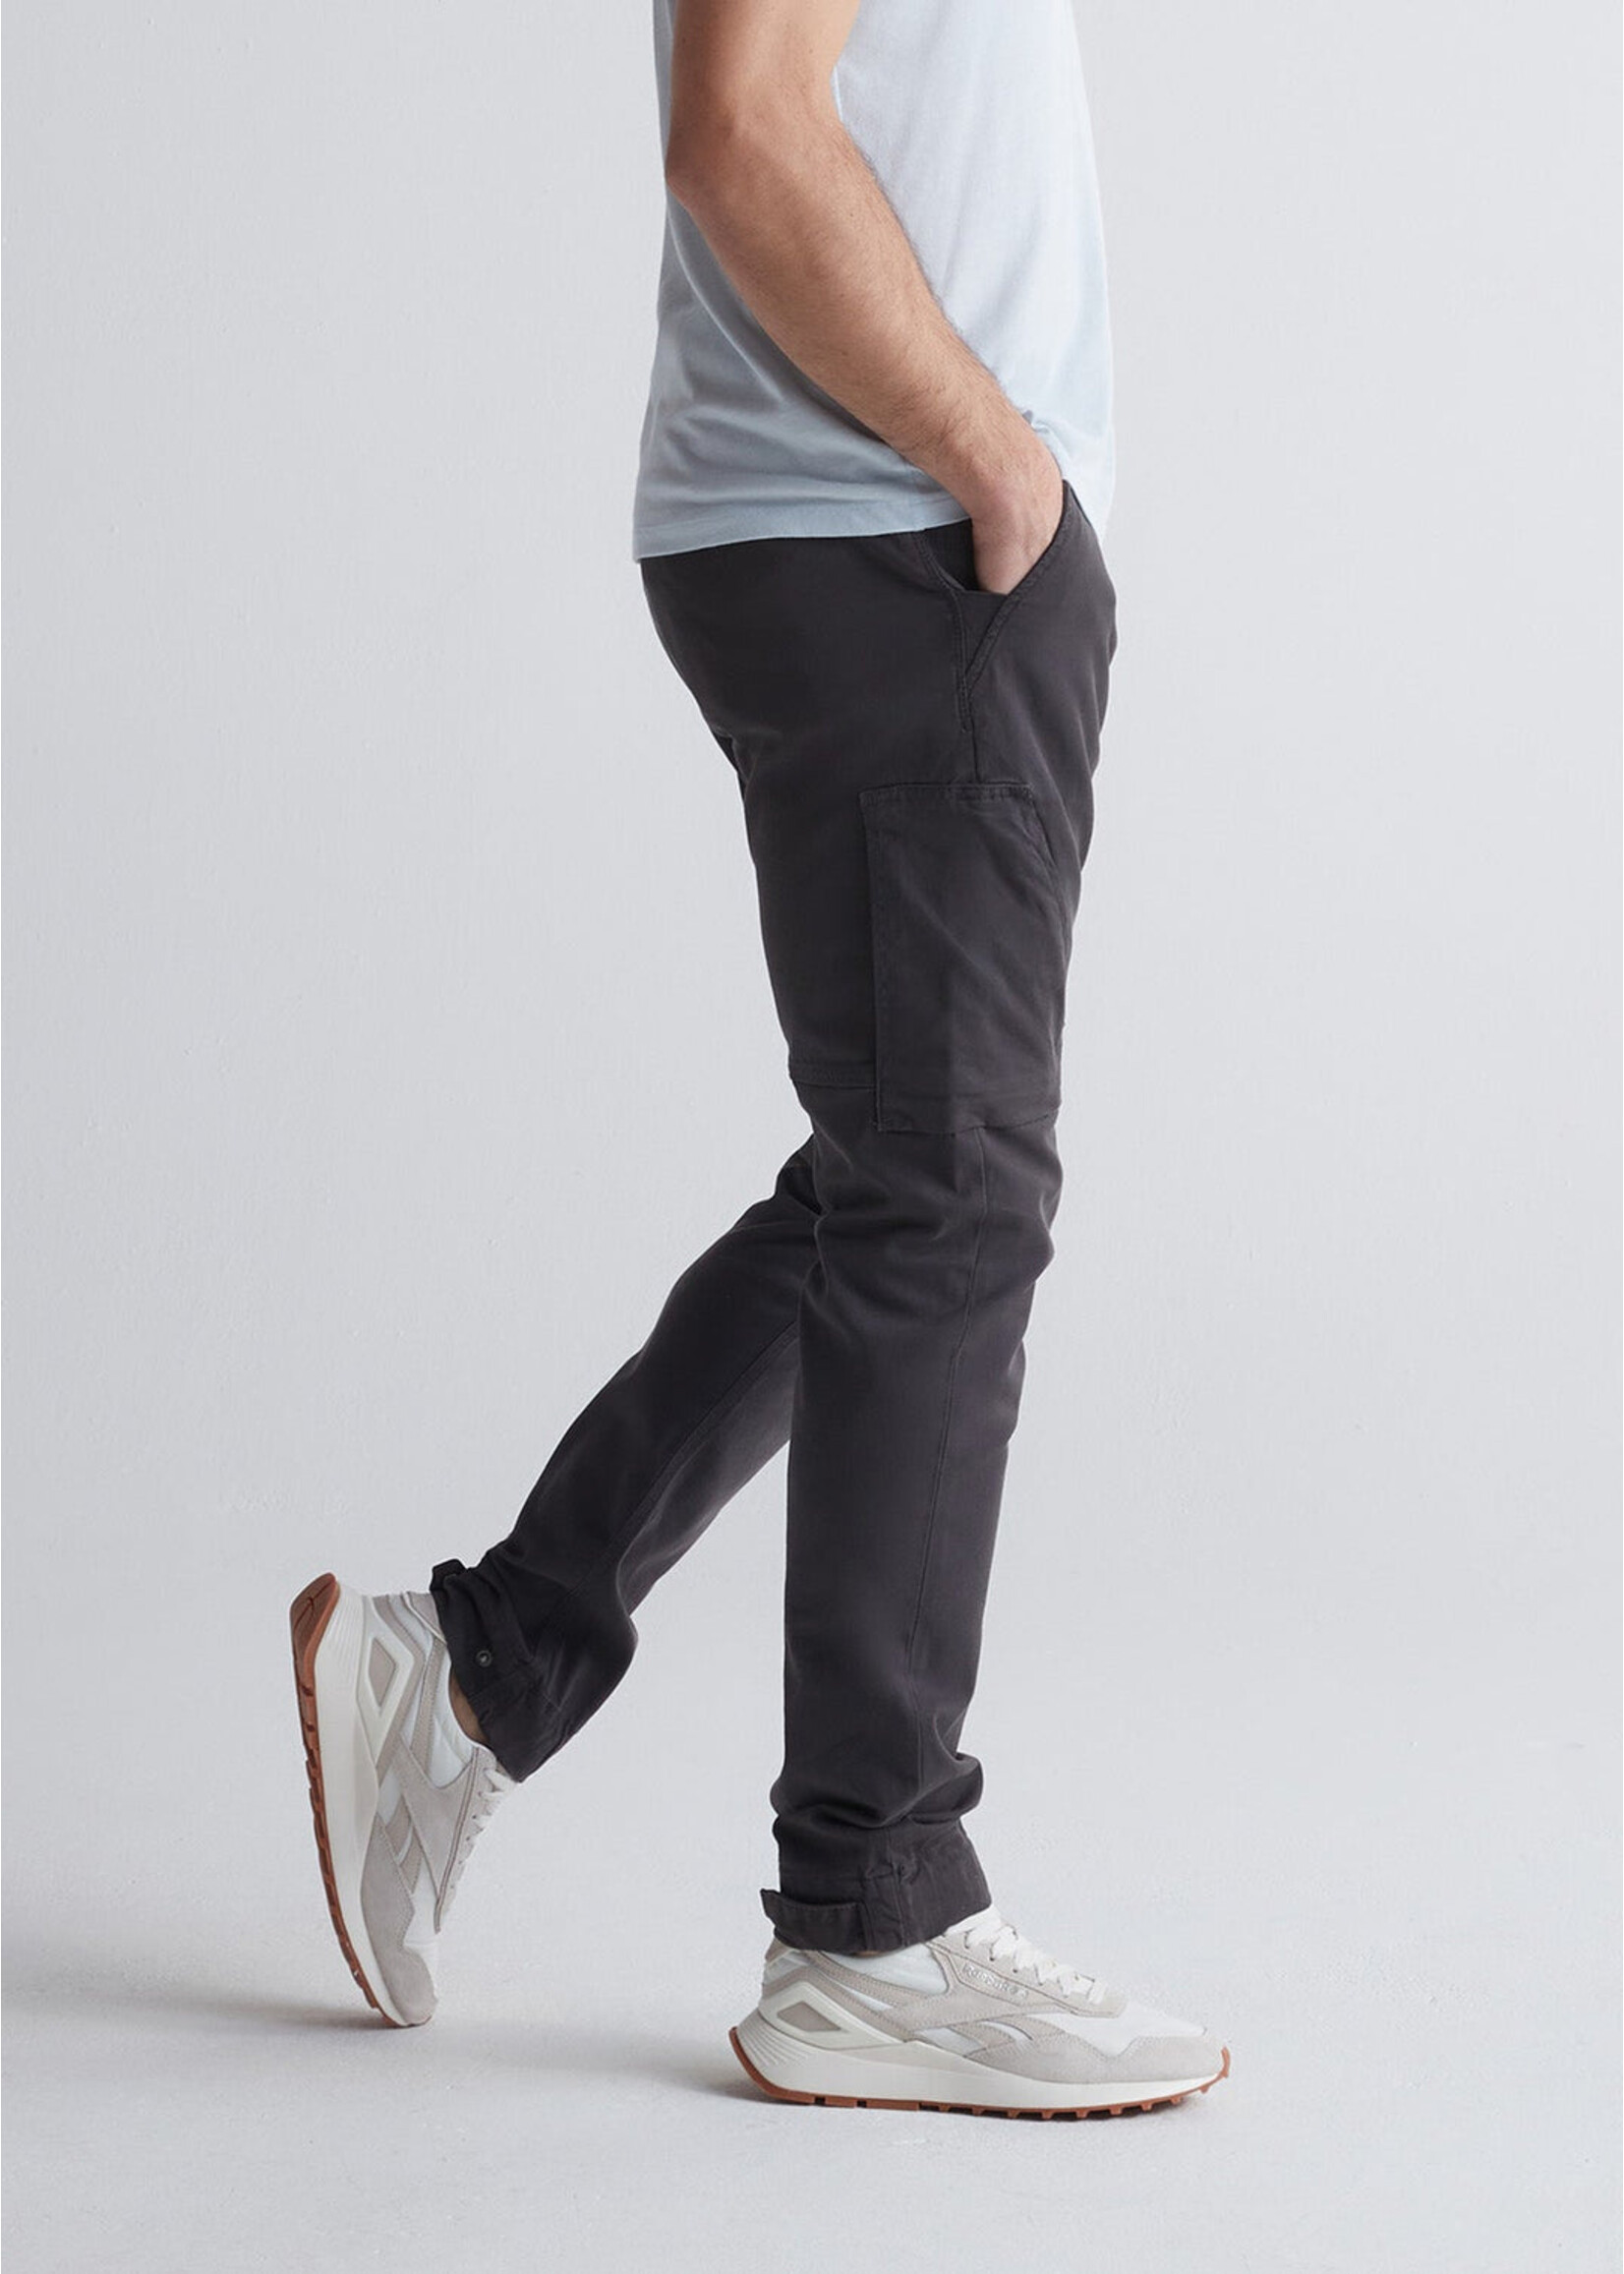 DUER Live Free Adventure Pant - Charcoal Grey